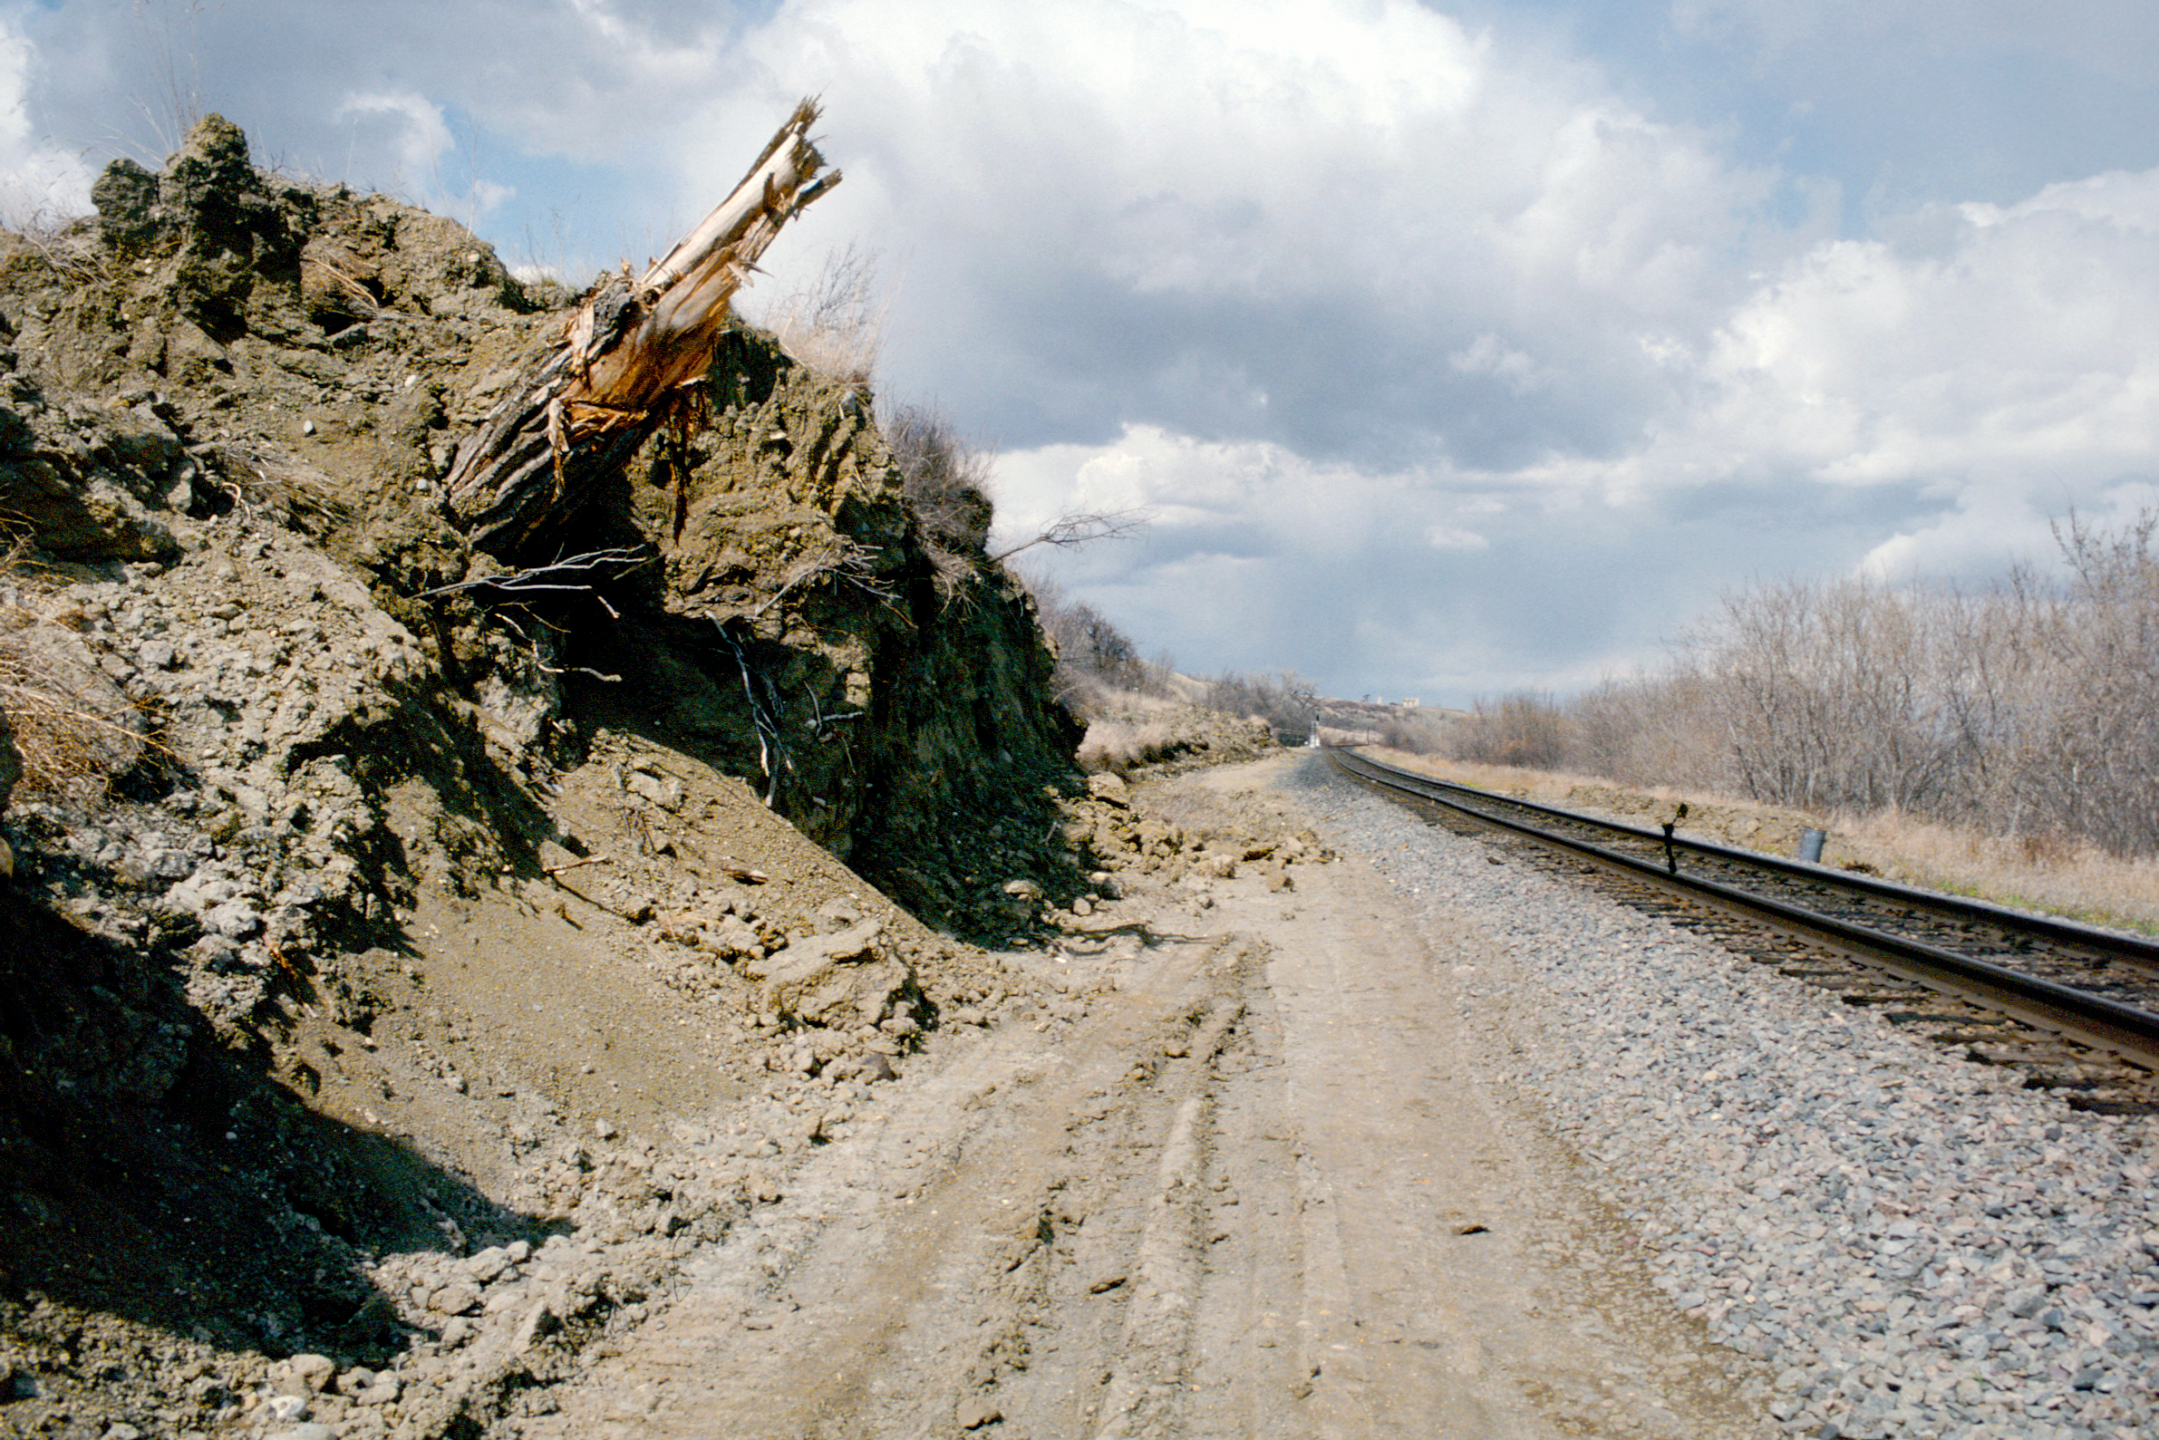 A photo of a dirt and tree stump landslide beside train tracks.